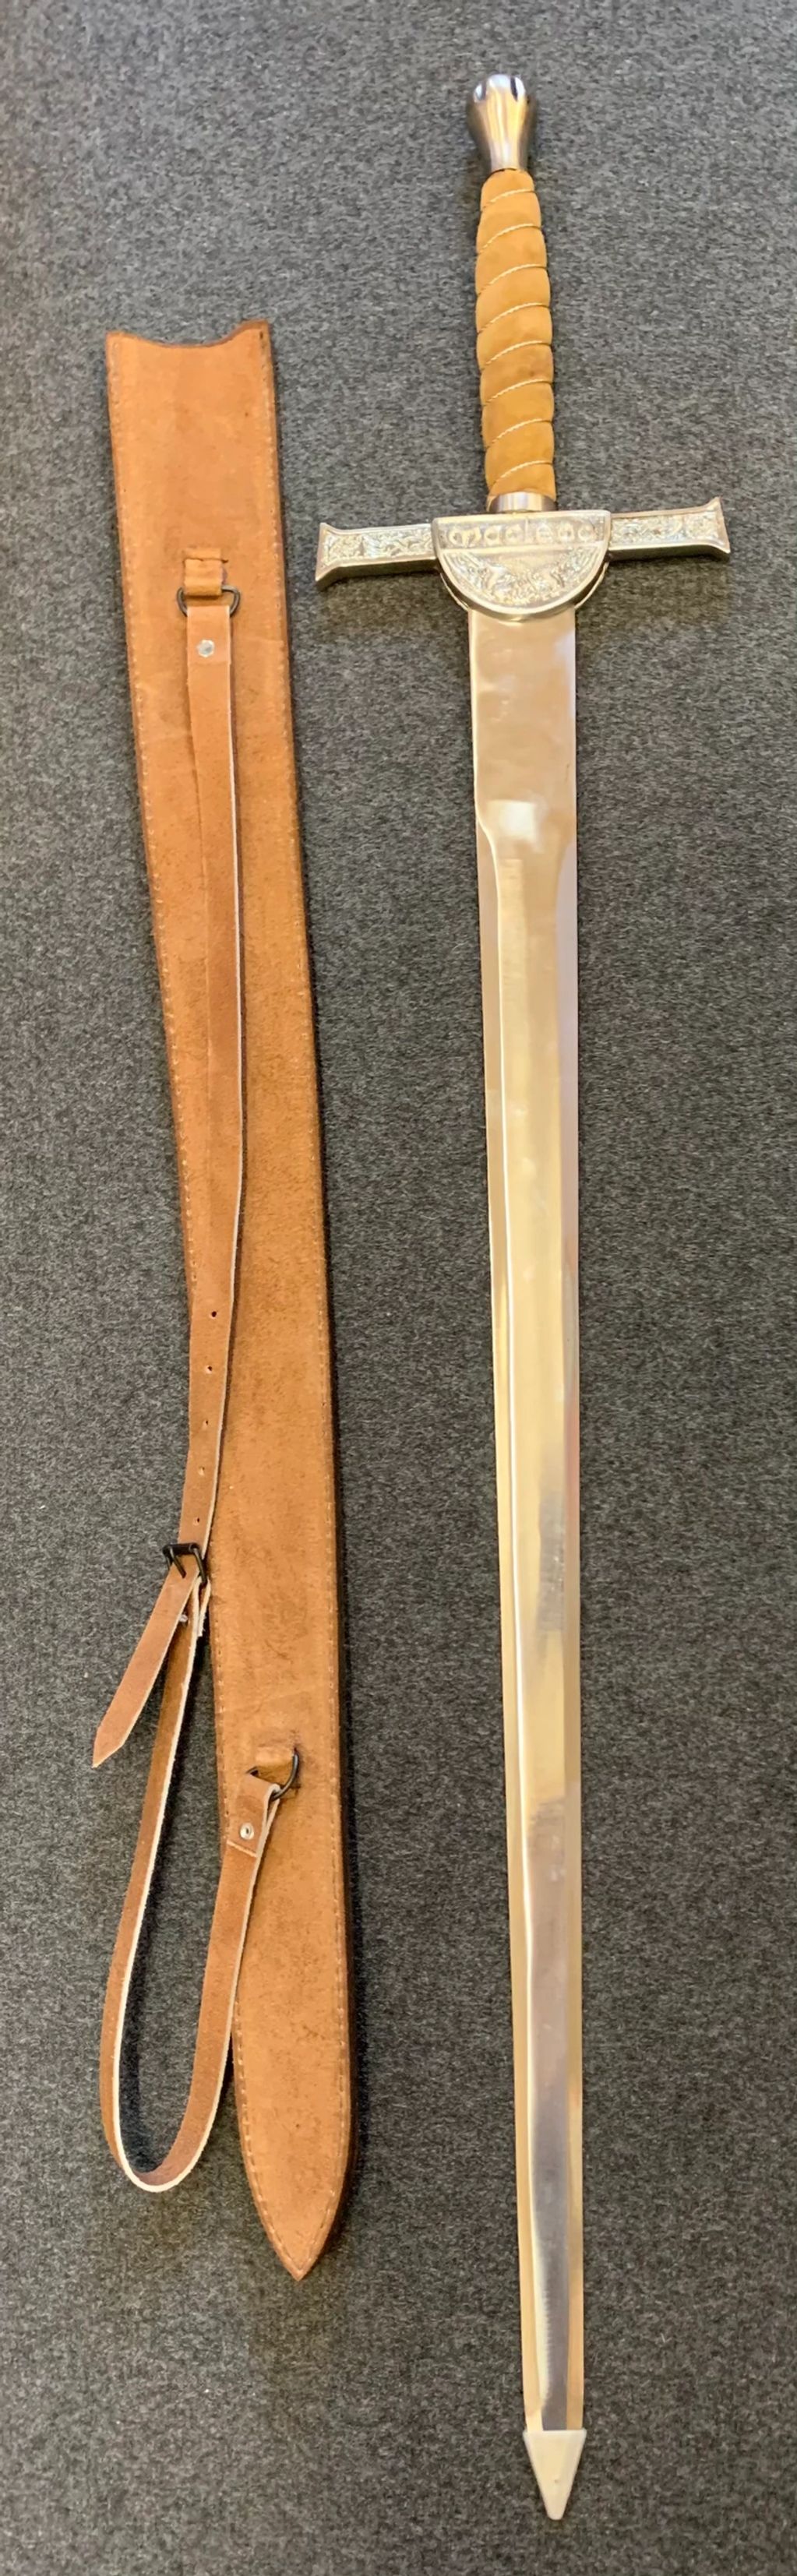 Broadsword With leather sheath and handle ornate Excalibur designs $159